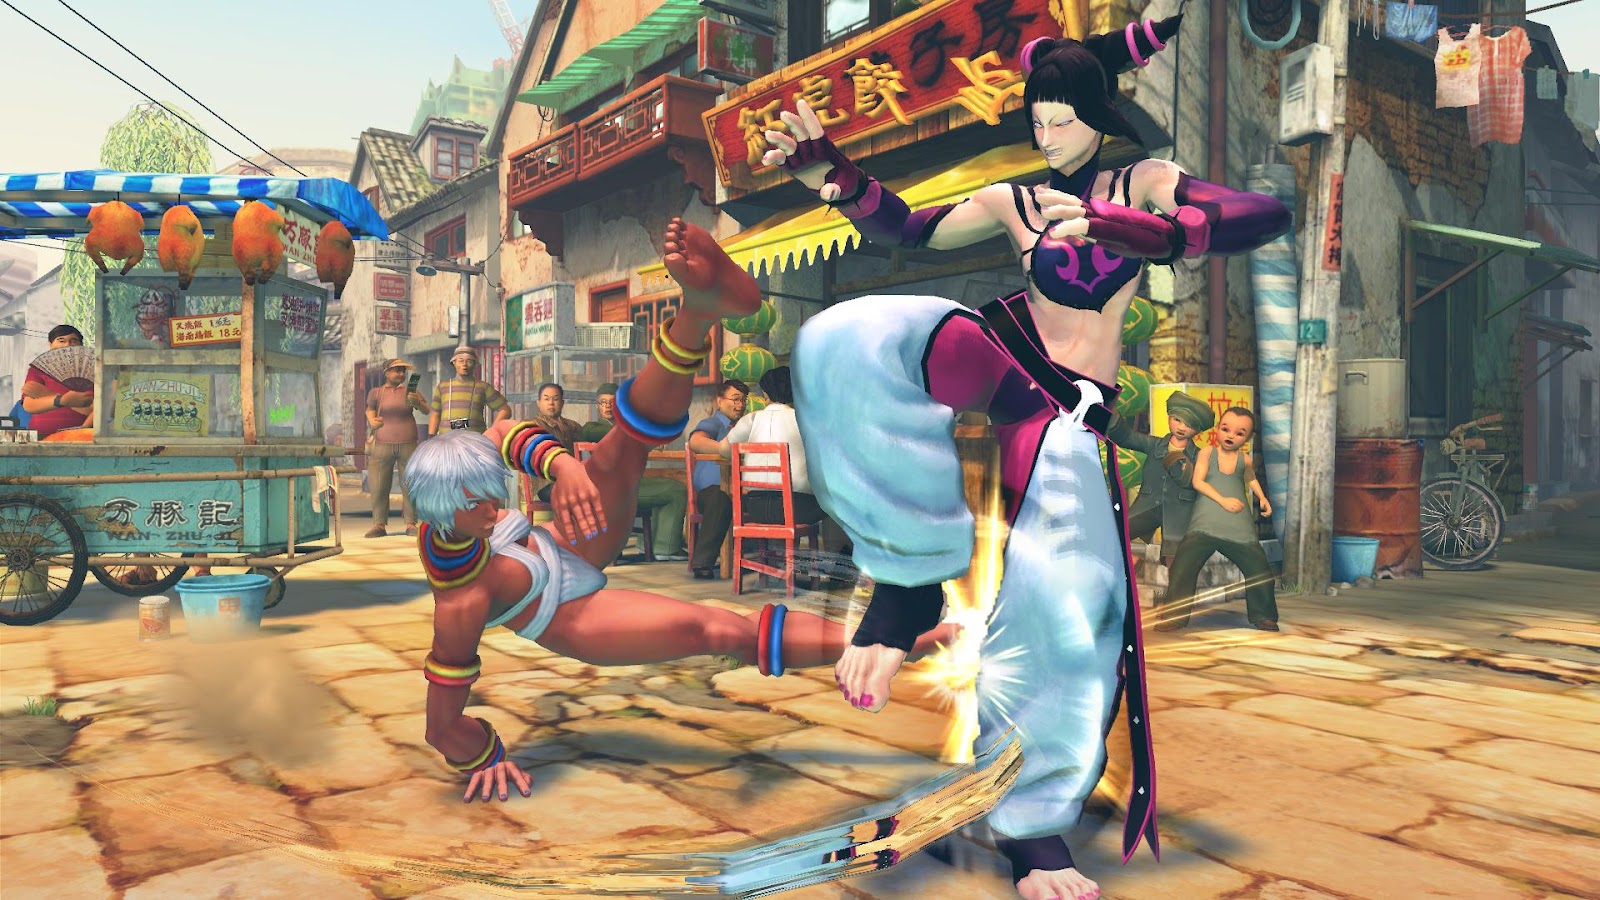 Review: Street Fighter IV Brings Back the Old Ultraviolence